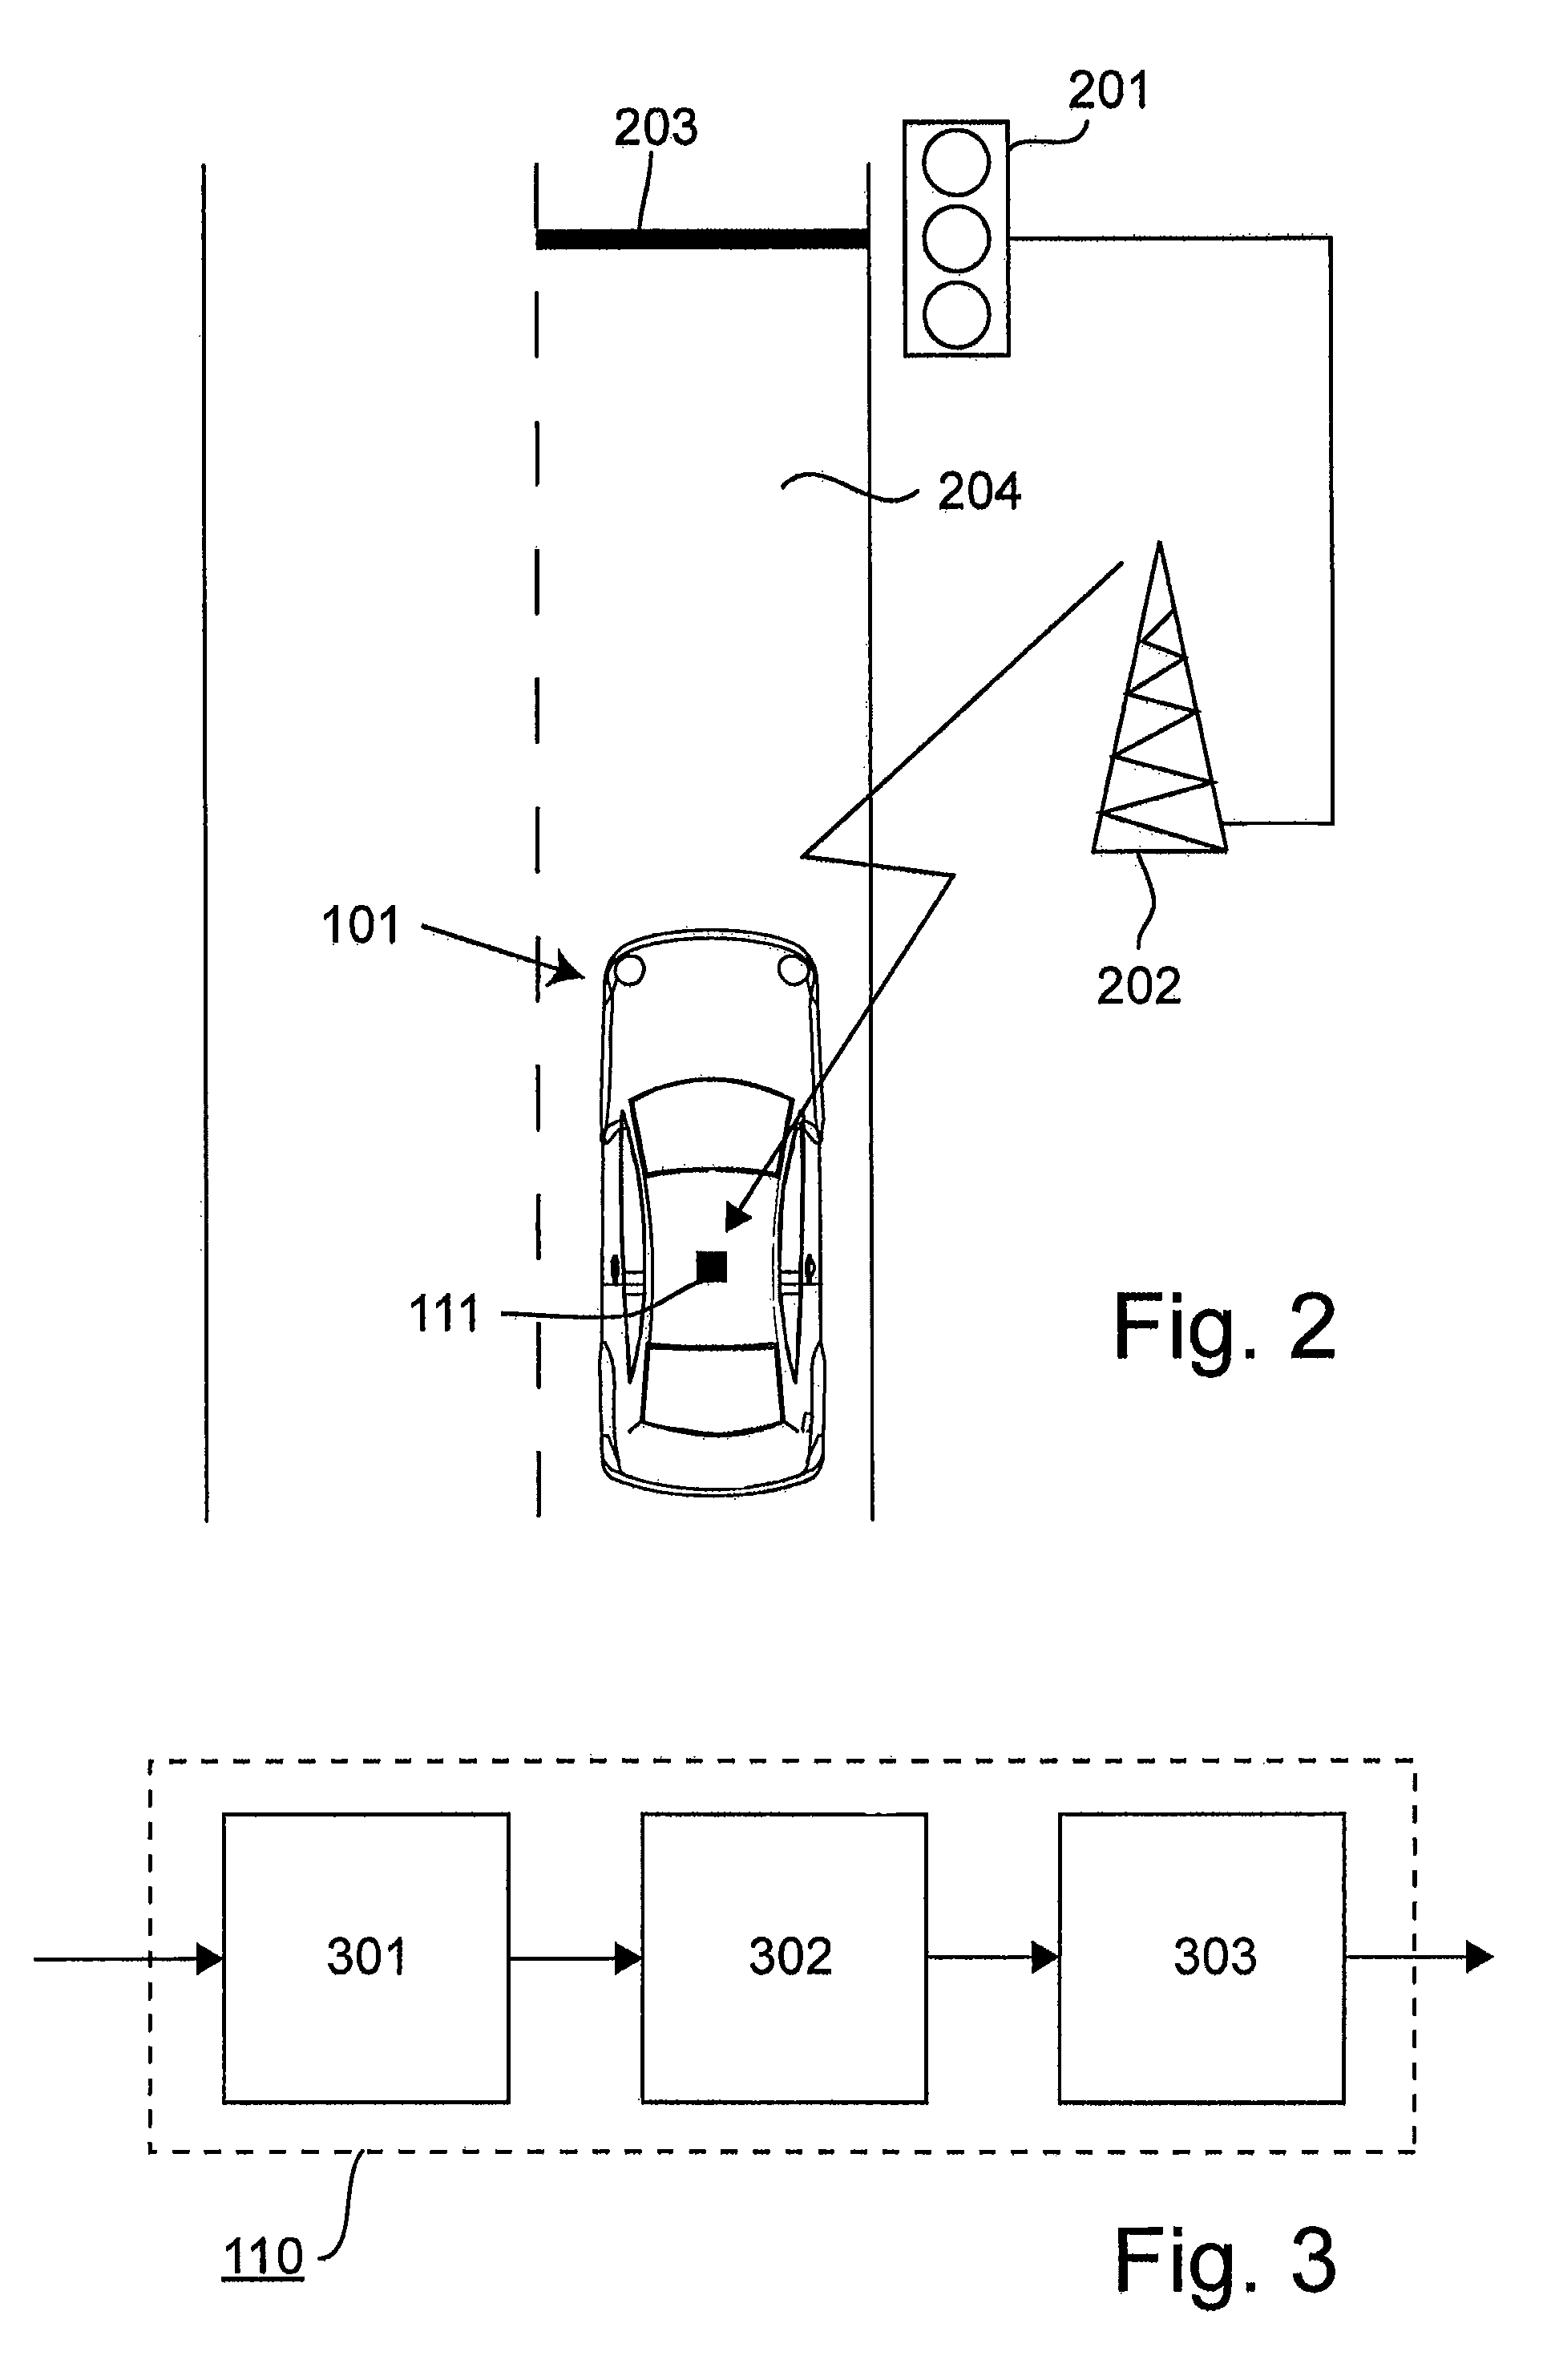 Method and device for assisting a vehicle operator